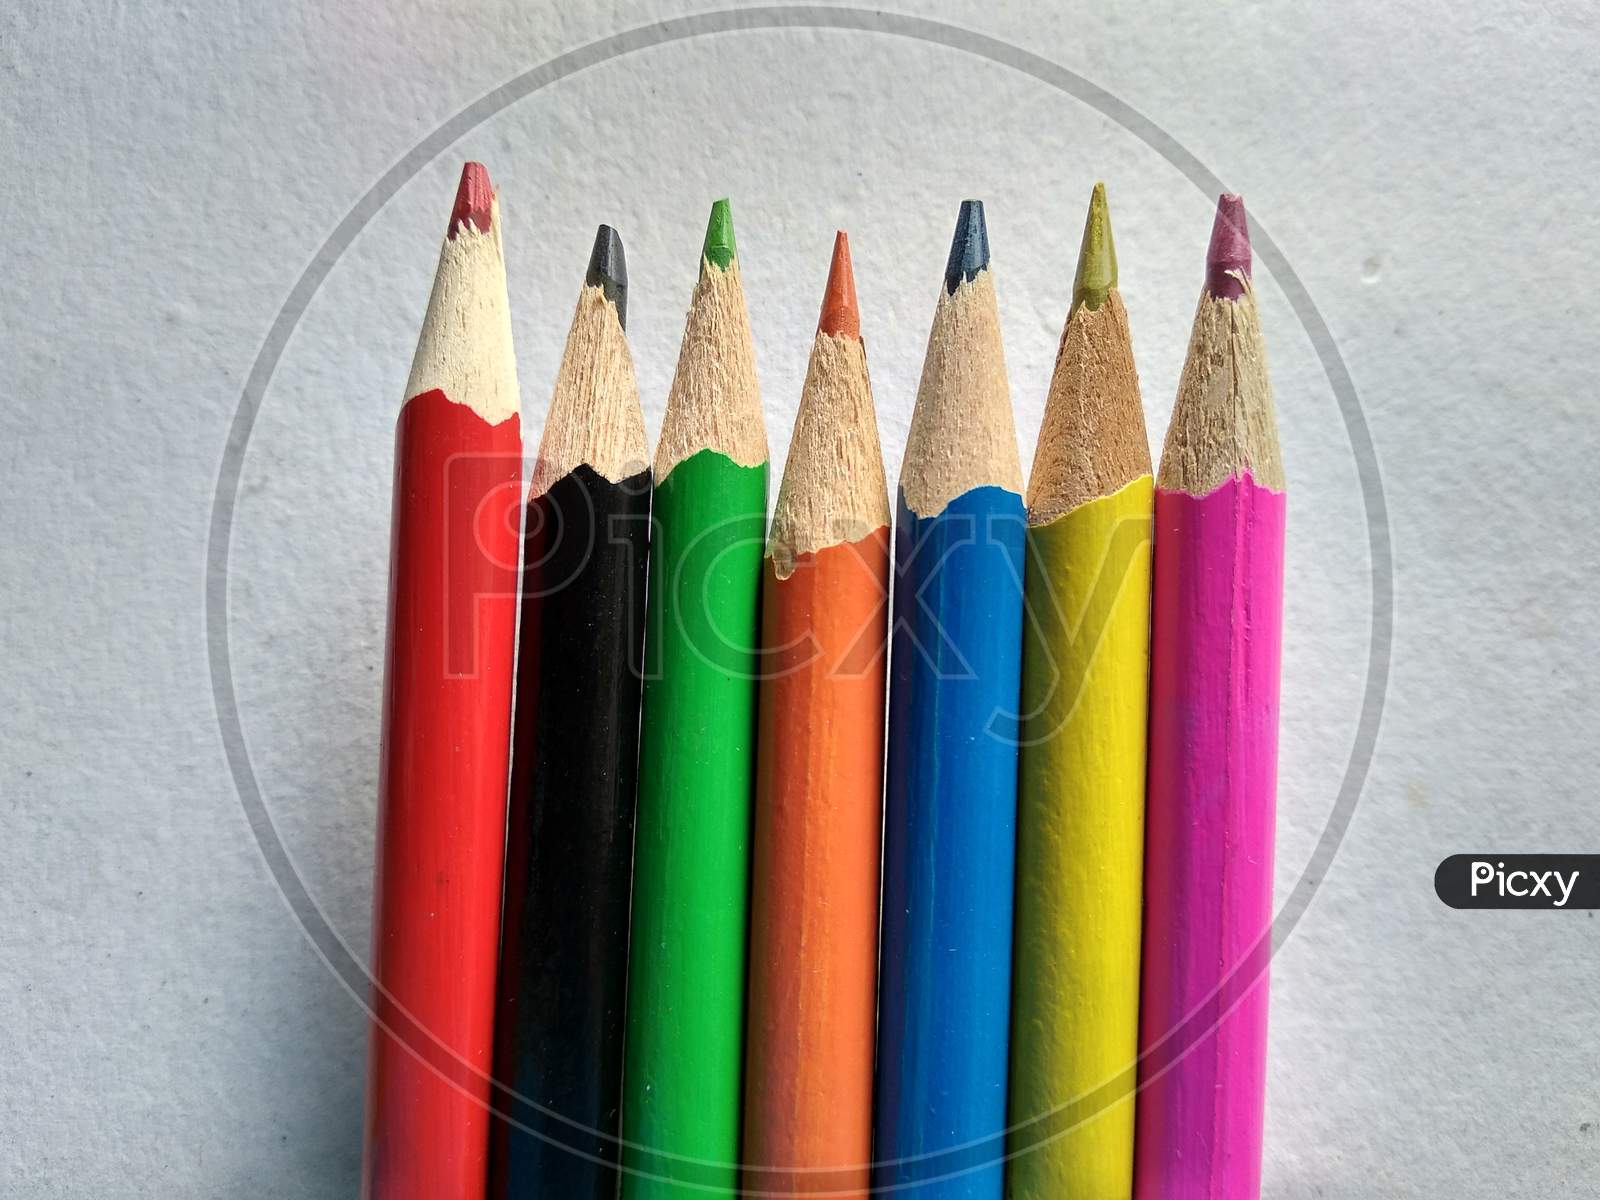 Pencil colours in the straight line